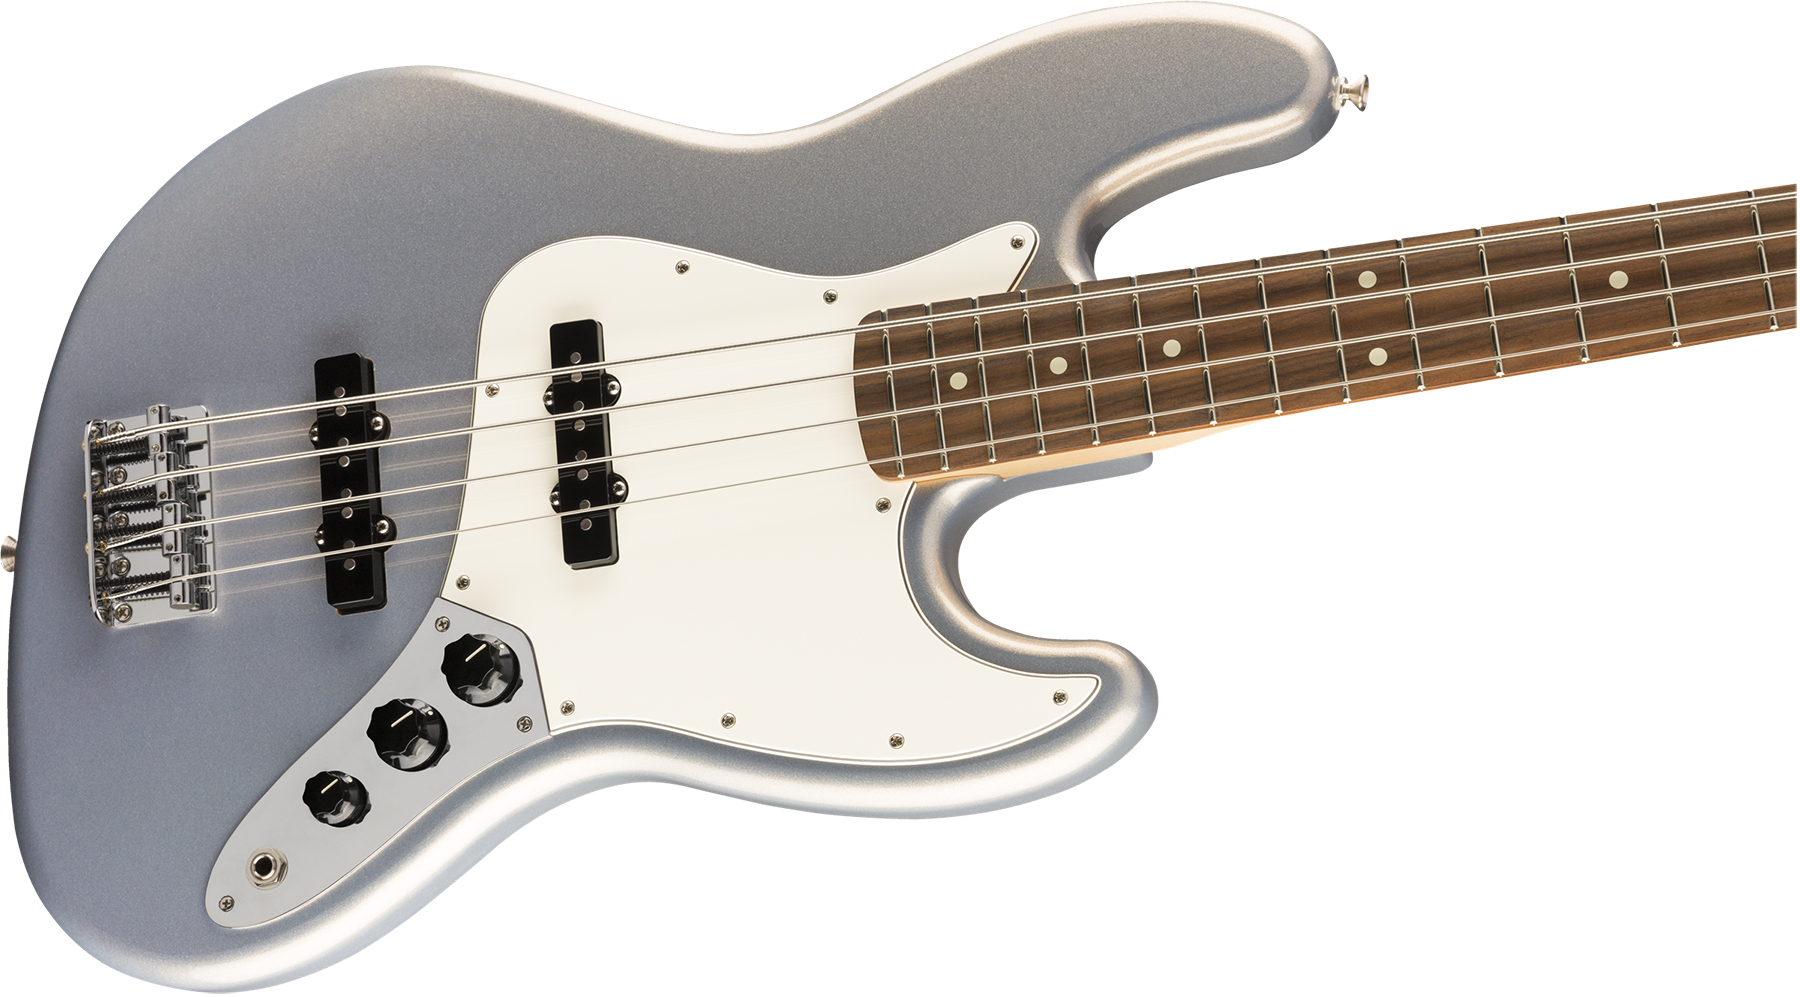 Fender Jazz Bass Player Mex Pf - Silver - Basse Électrique Solid Body - Variation 2